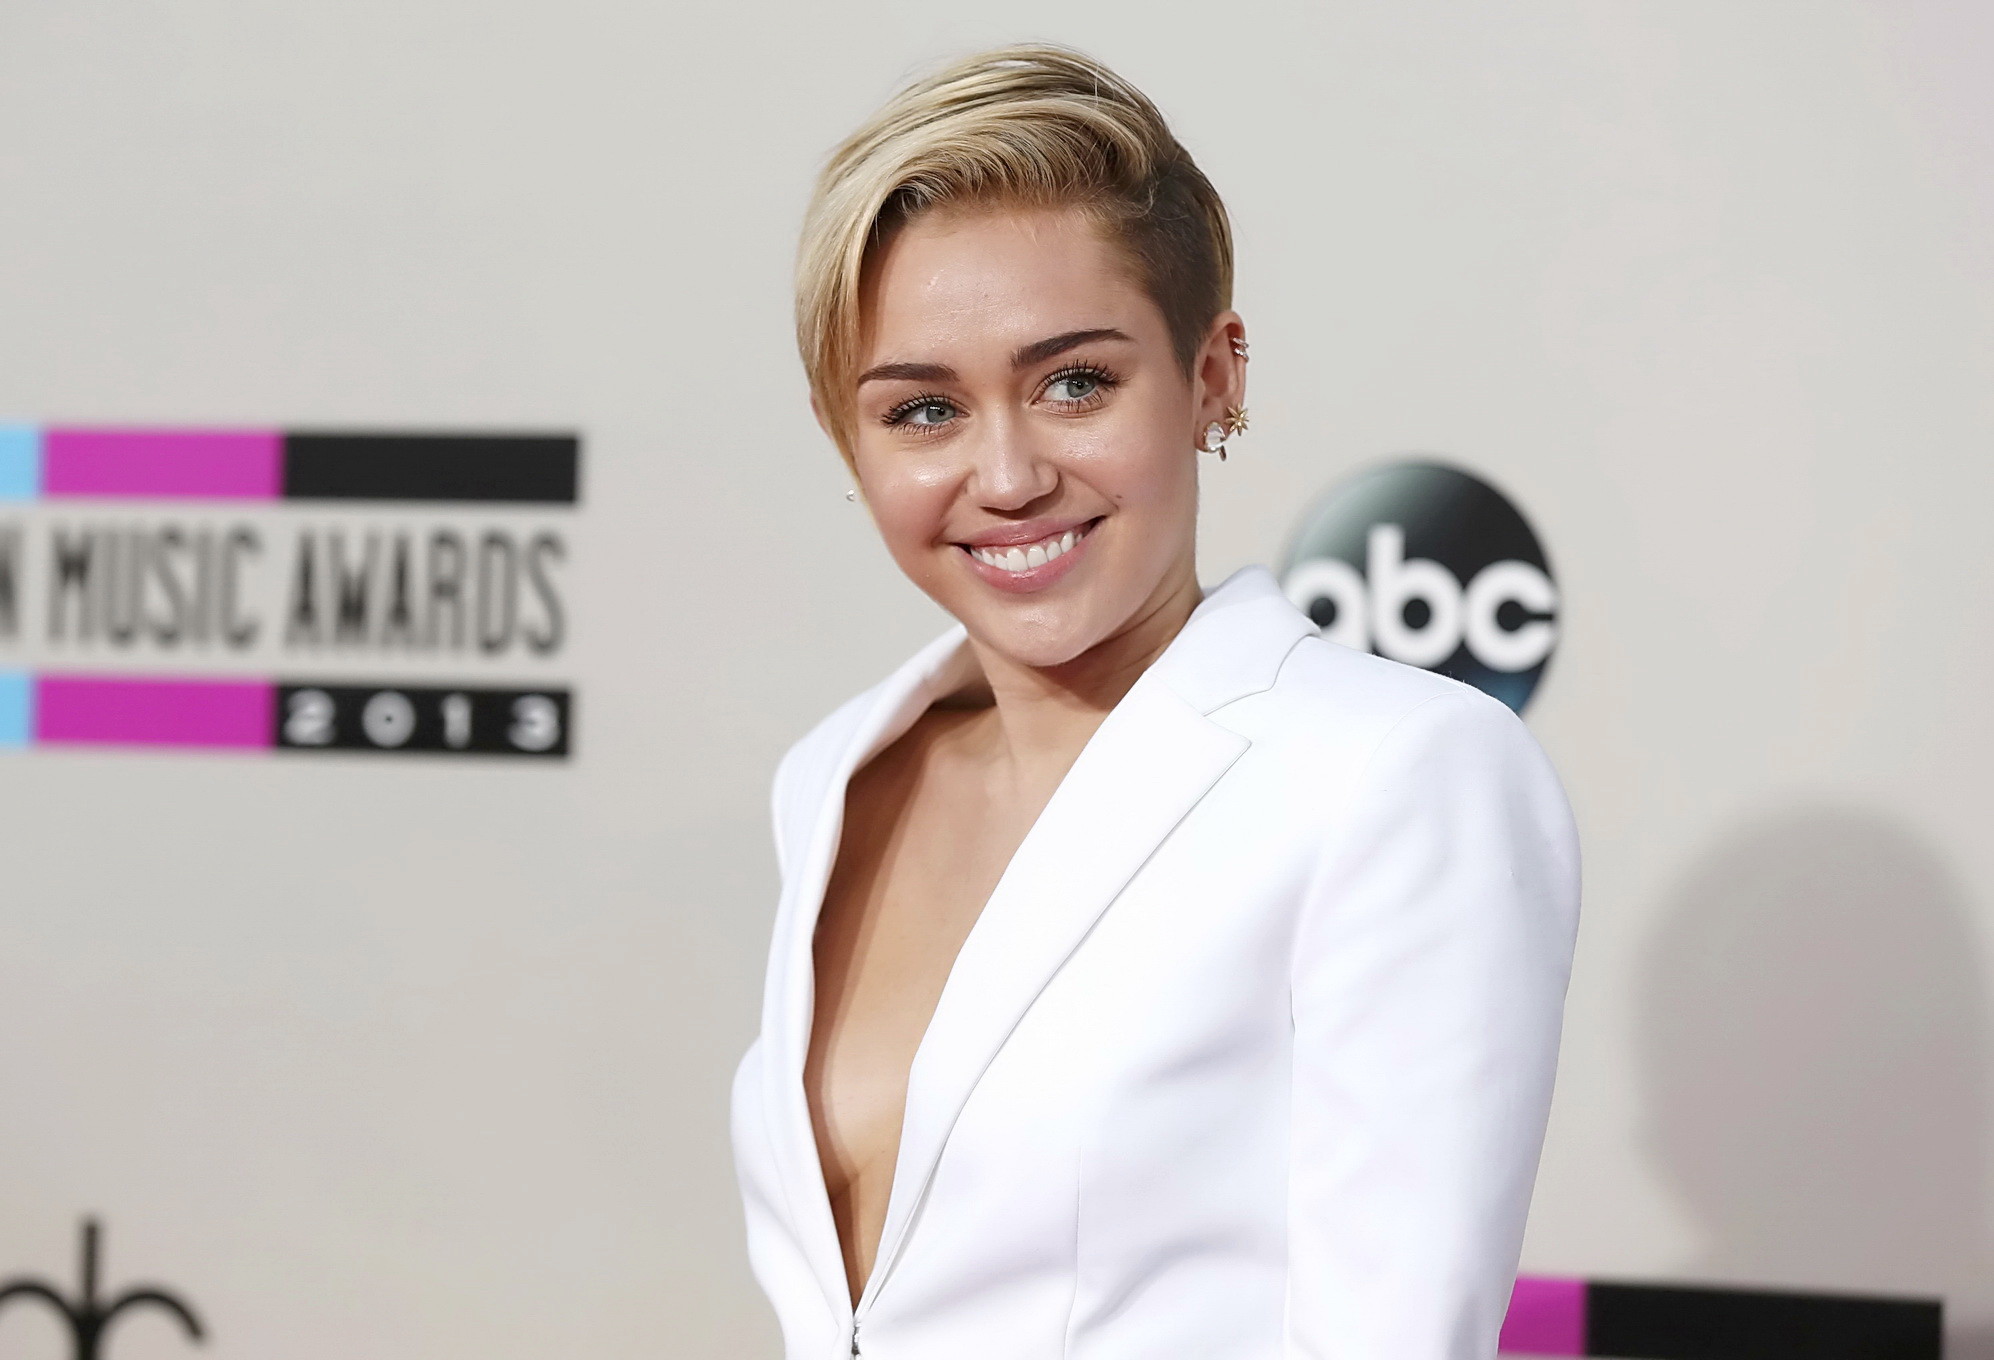 Miley Cyrus braless showing great cleavage in a white suit at 2013 American Musi #75212065